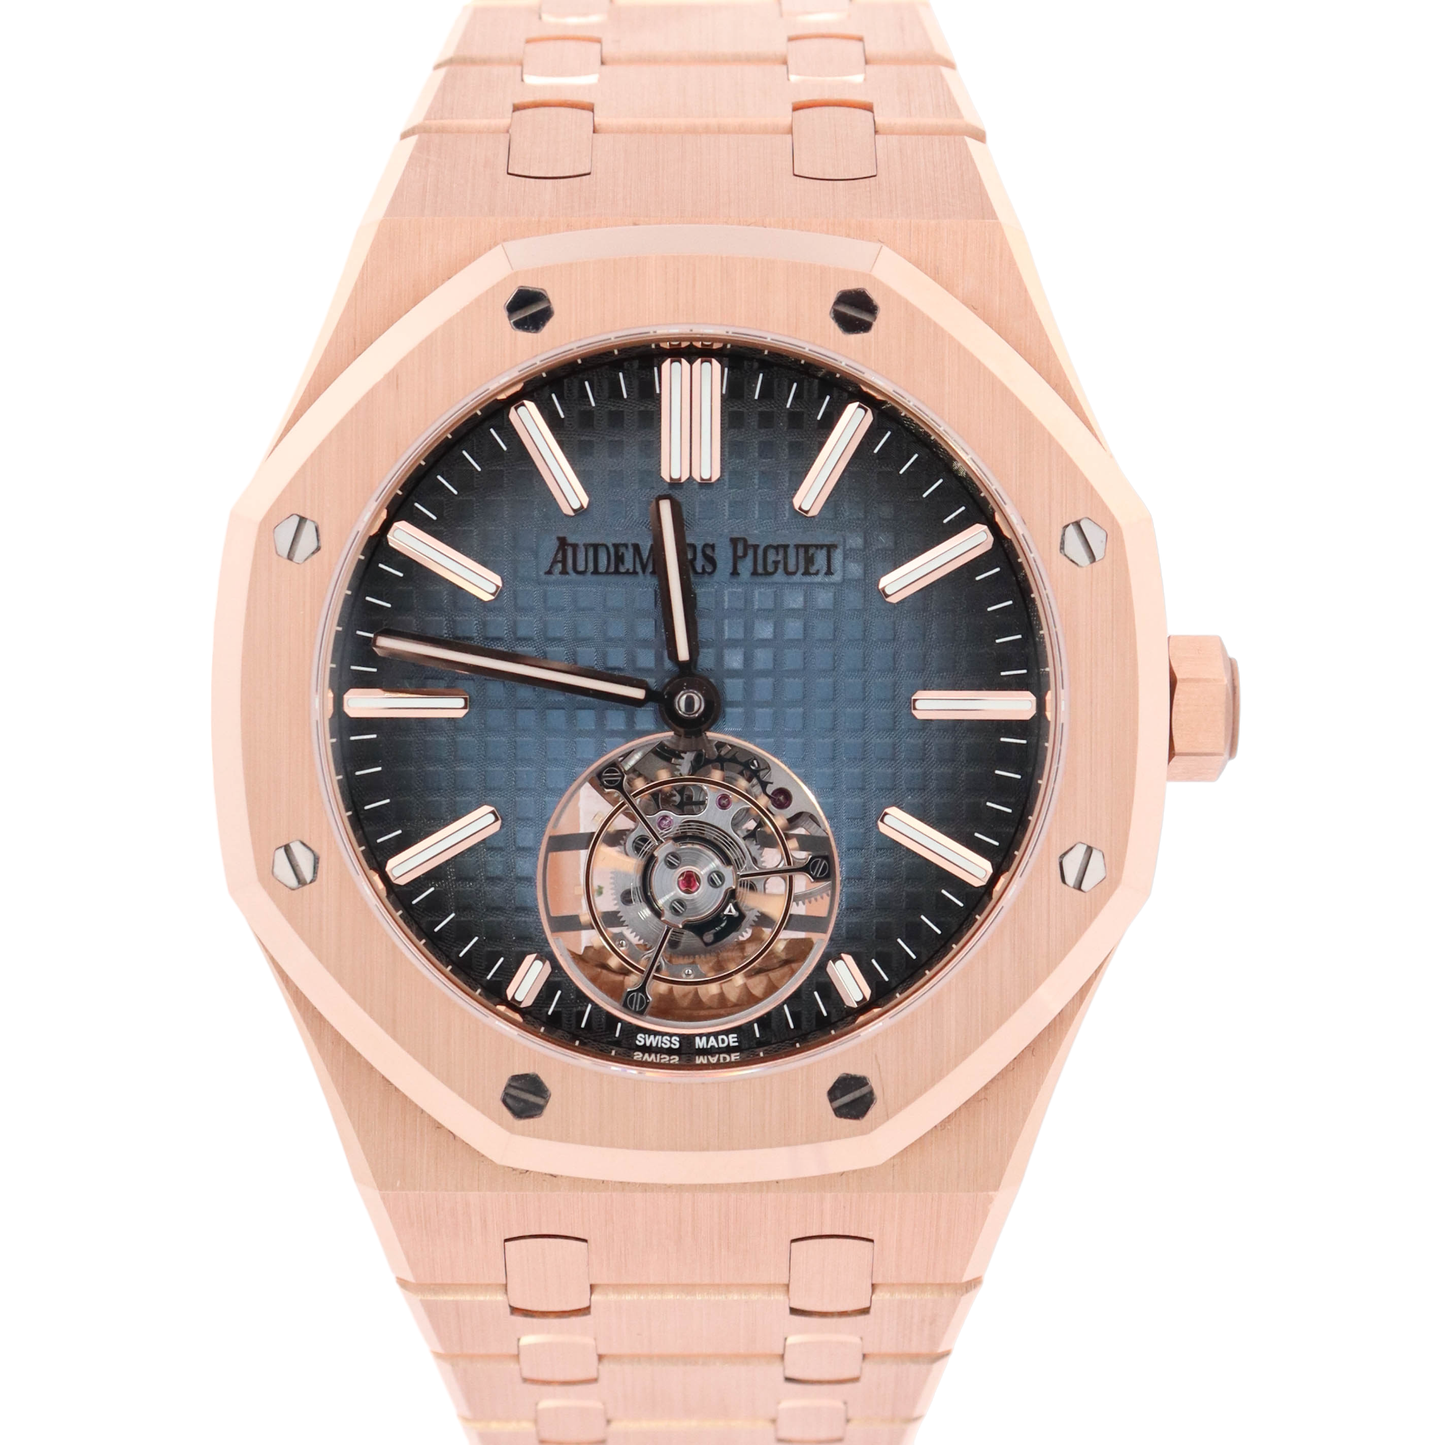 Audemars Piguet Royal Oak Selfwinding Tourbillon "50th Anniversary" 41mm Rose Gold Smoked Blue Tourbillon Dial Watch Reference# 26730OR.OO.1320OR.01 - Happy Jewelers Fine Jewelry Lifetime Warranty